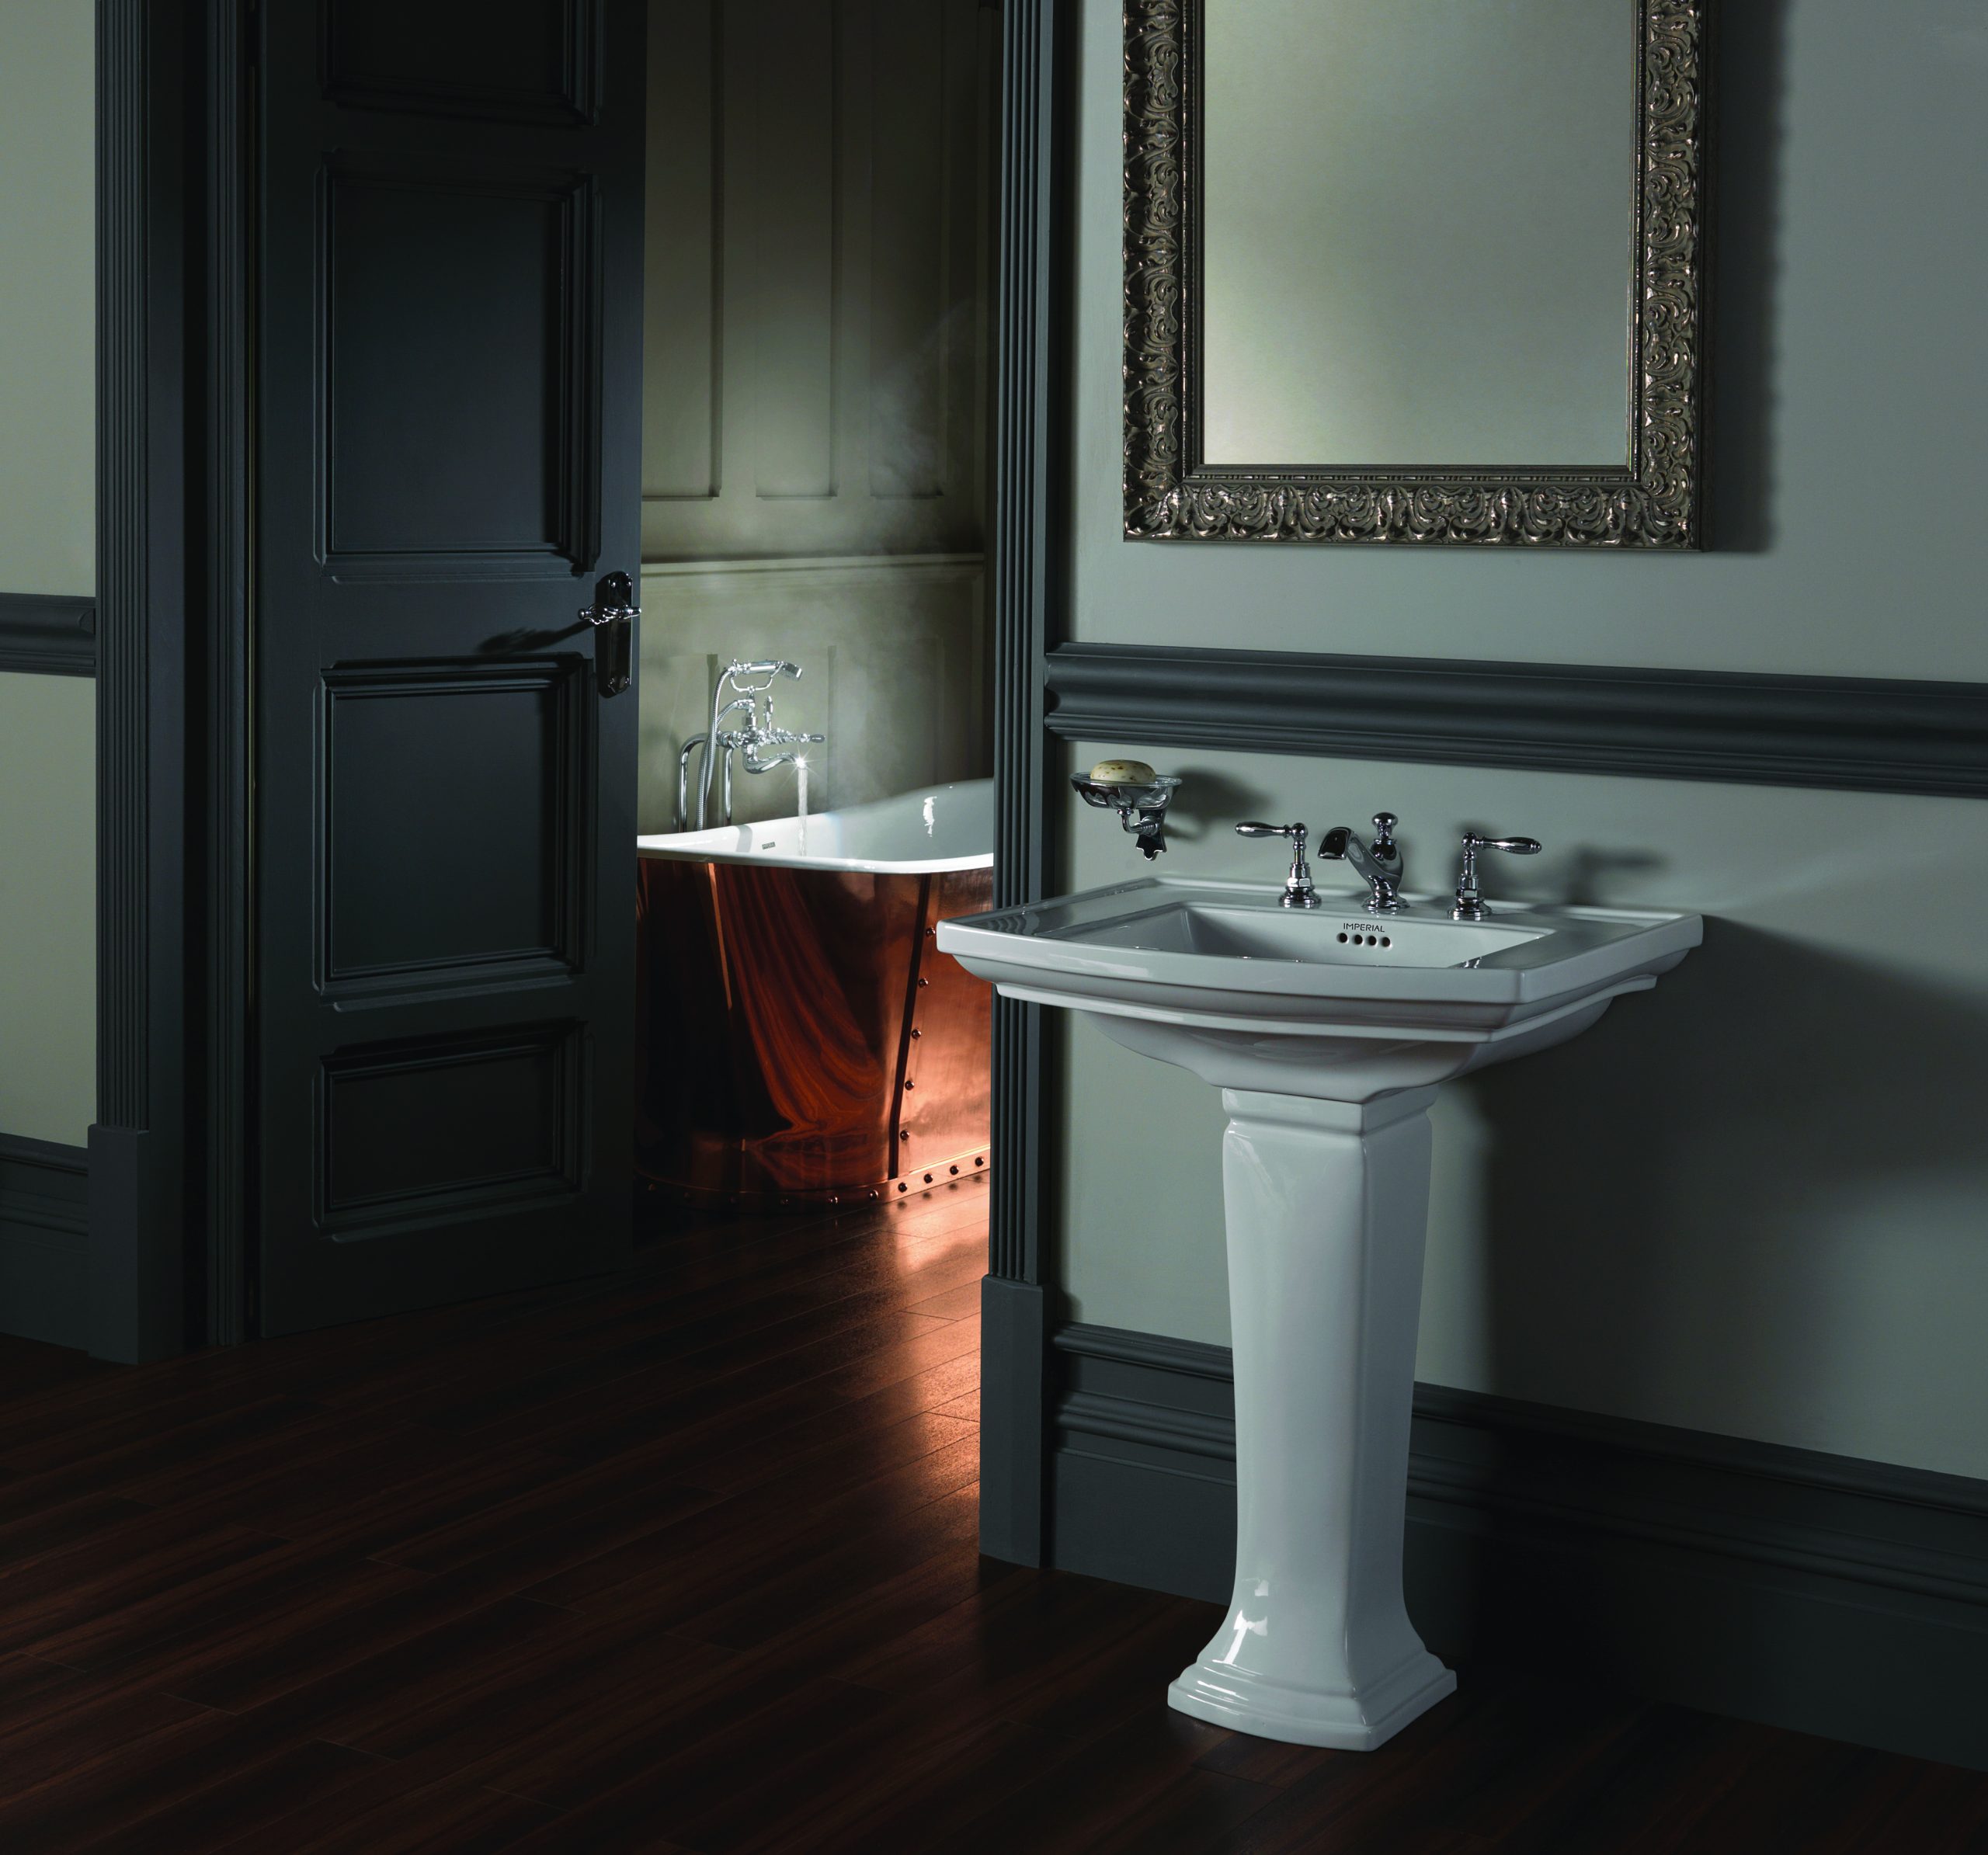 ‘British bathrooms made easy’ with Imperial Bathrooms New Website @ImpBath